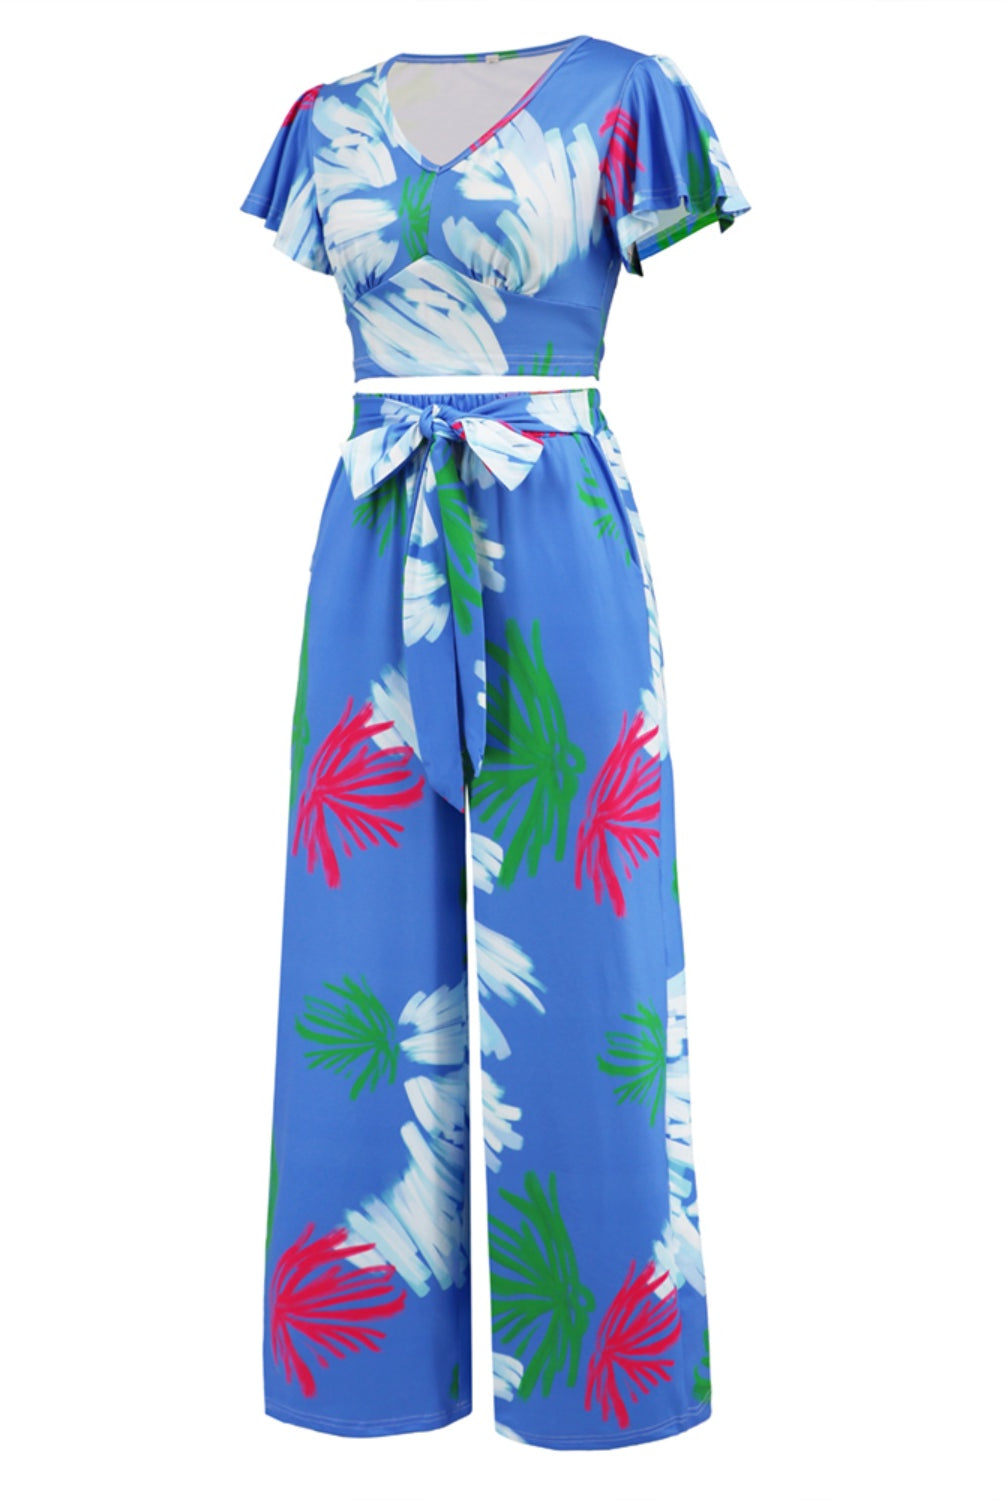 Steel Blue Printed V-Neck Top and Tied Pants Set Vacation